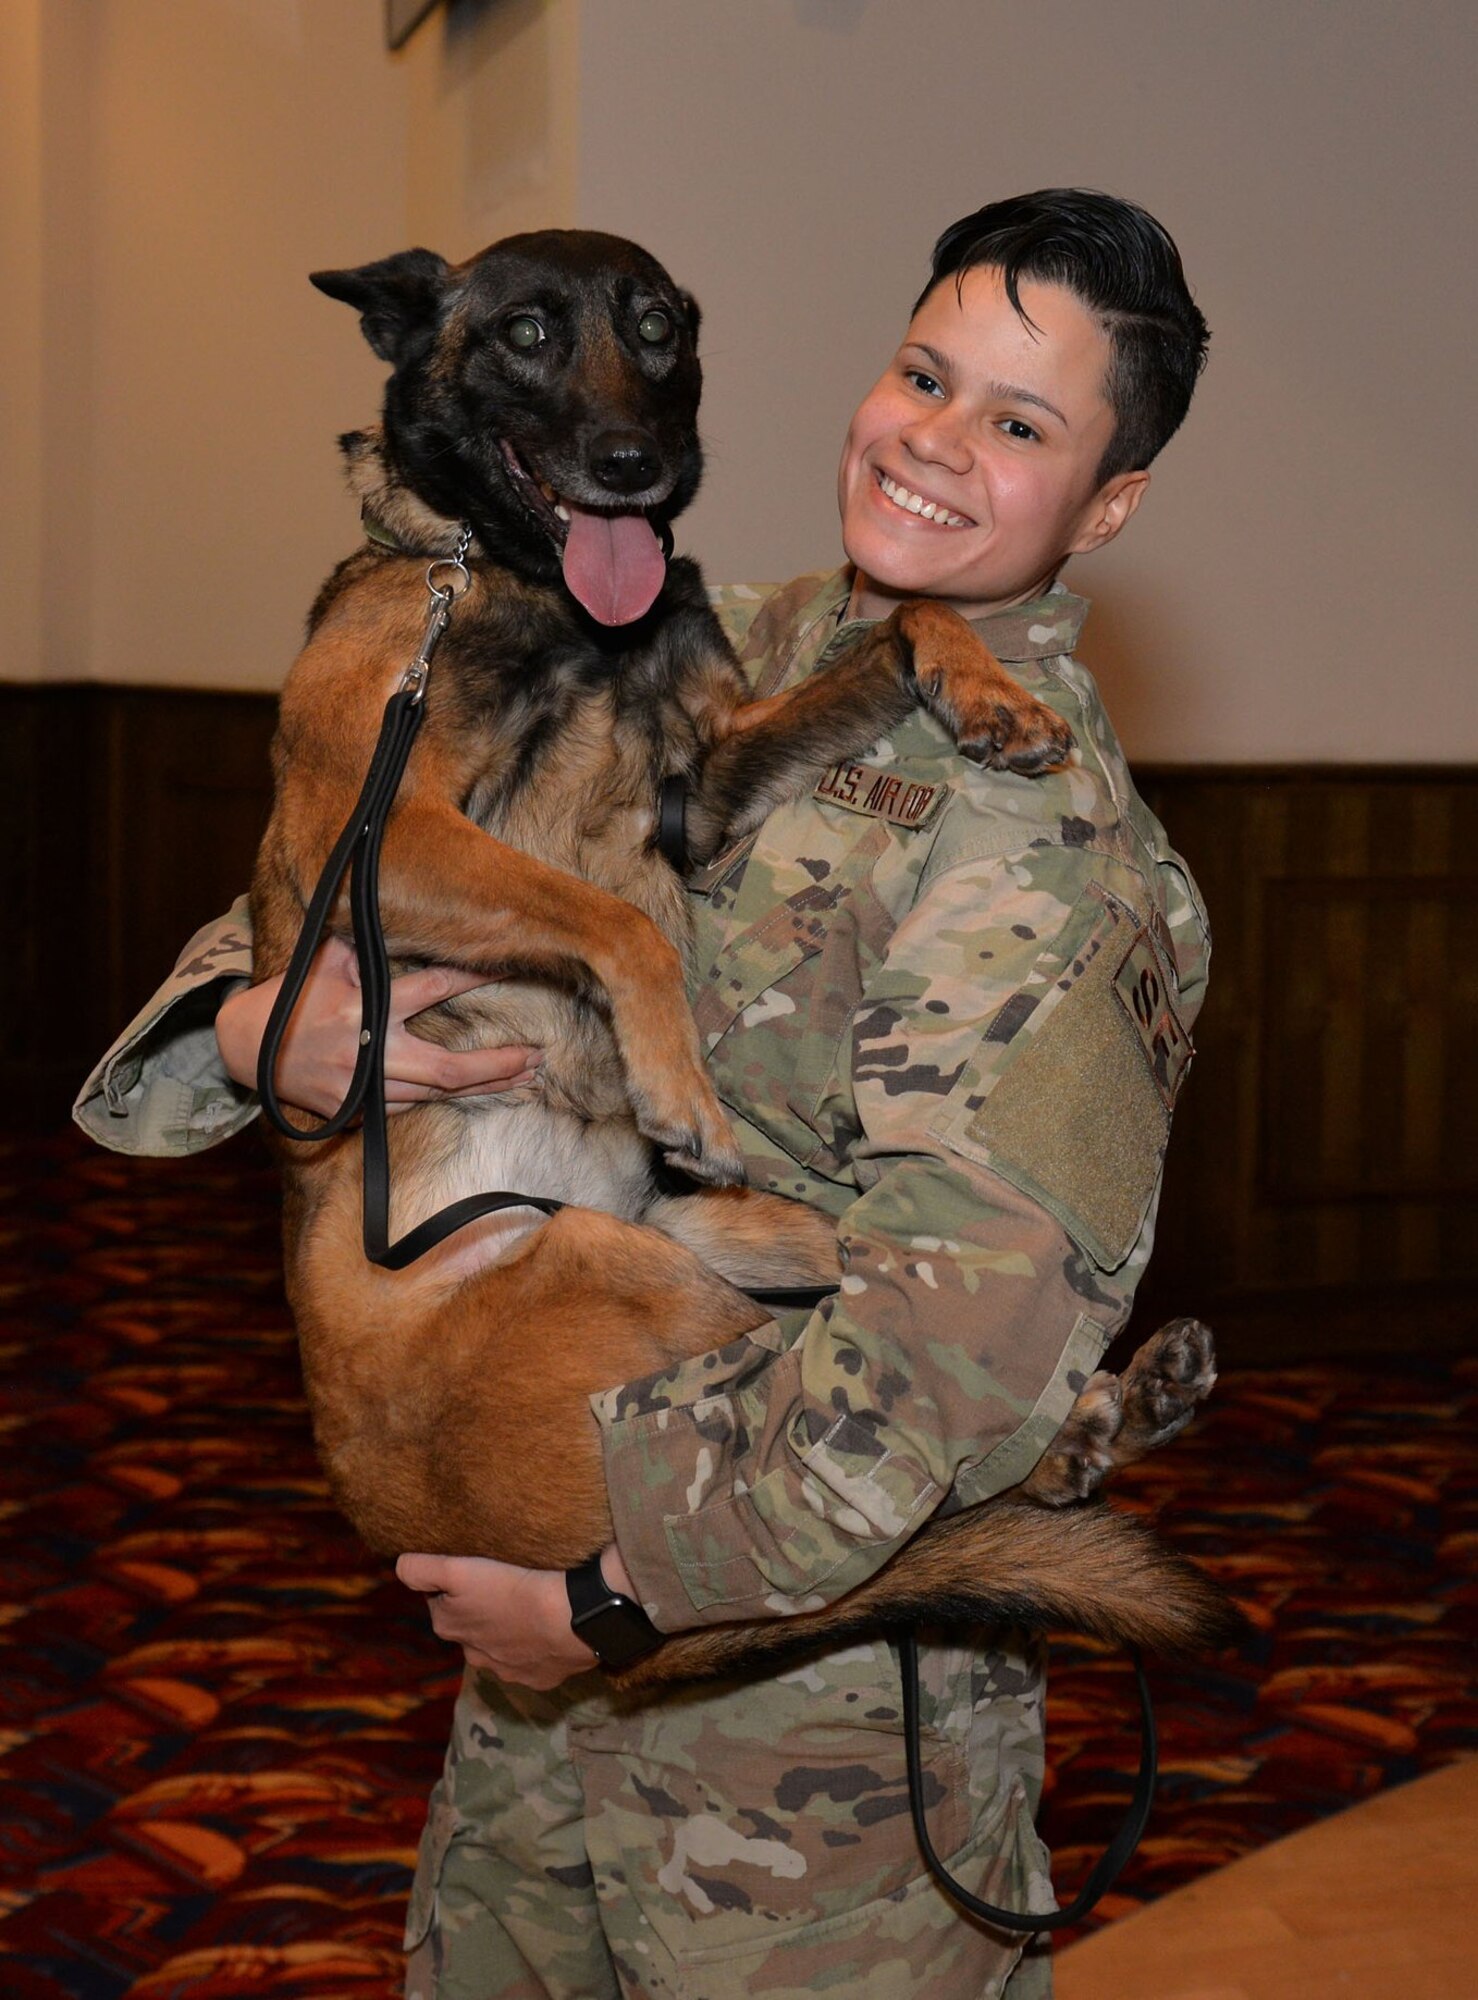 U.S. Air Force Military Working Dog Ukkie shows a look of utter joy as she is held by former 100th Security Forces Squadron handler, then-Staff Sgt Kristina Santos, at the retirement ceremony of MWD Vvonya at Royal Air Force Mildenhall, England, Jan. 18, 2019. Ukkie was part of a dog swap with RAF Lakenheath in 2020 and has been assigned to the 48th Security Forces Squadron kennels since then, retired from active-duty service at a ceremony Dec. 13, 2023. She has been adopted by Santos, now a civilian dog trainer, and is ready to put her paws up at her forever-home in Virginia. (U.S. Air Force photo by Karen Abeyasekere)